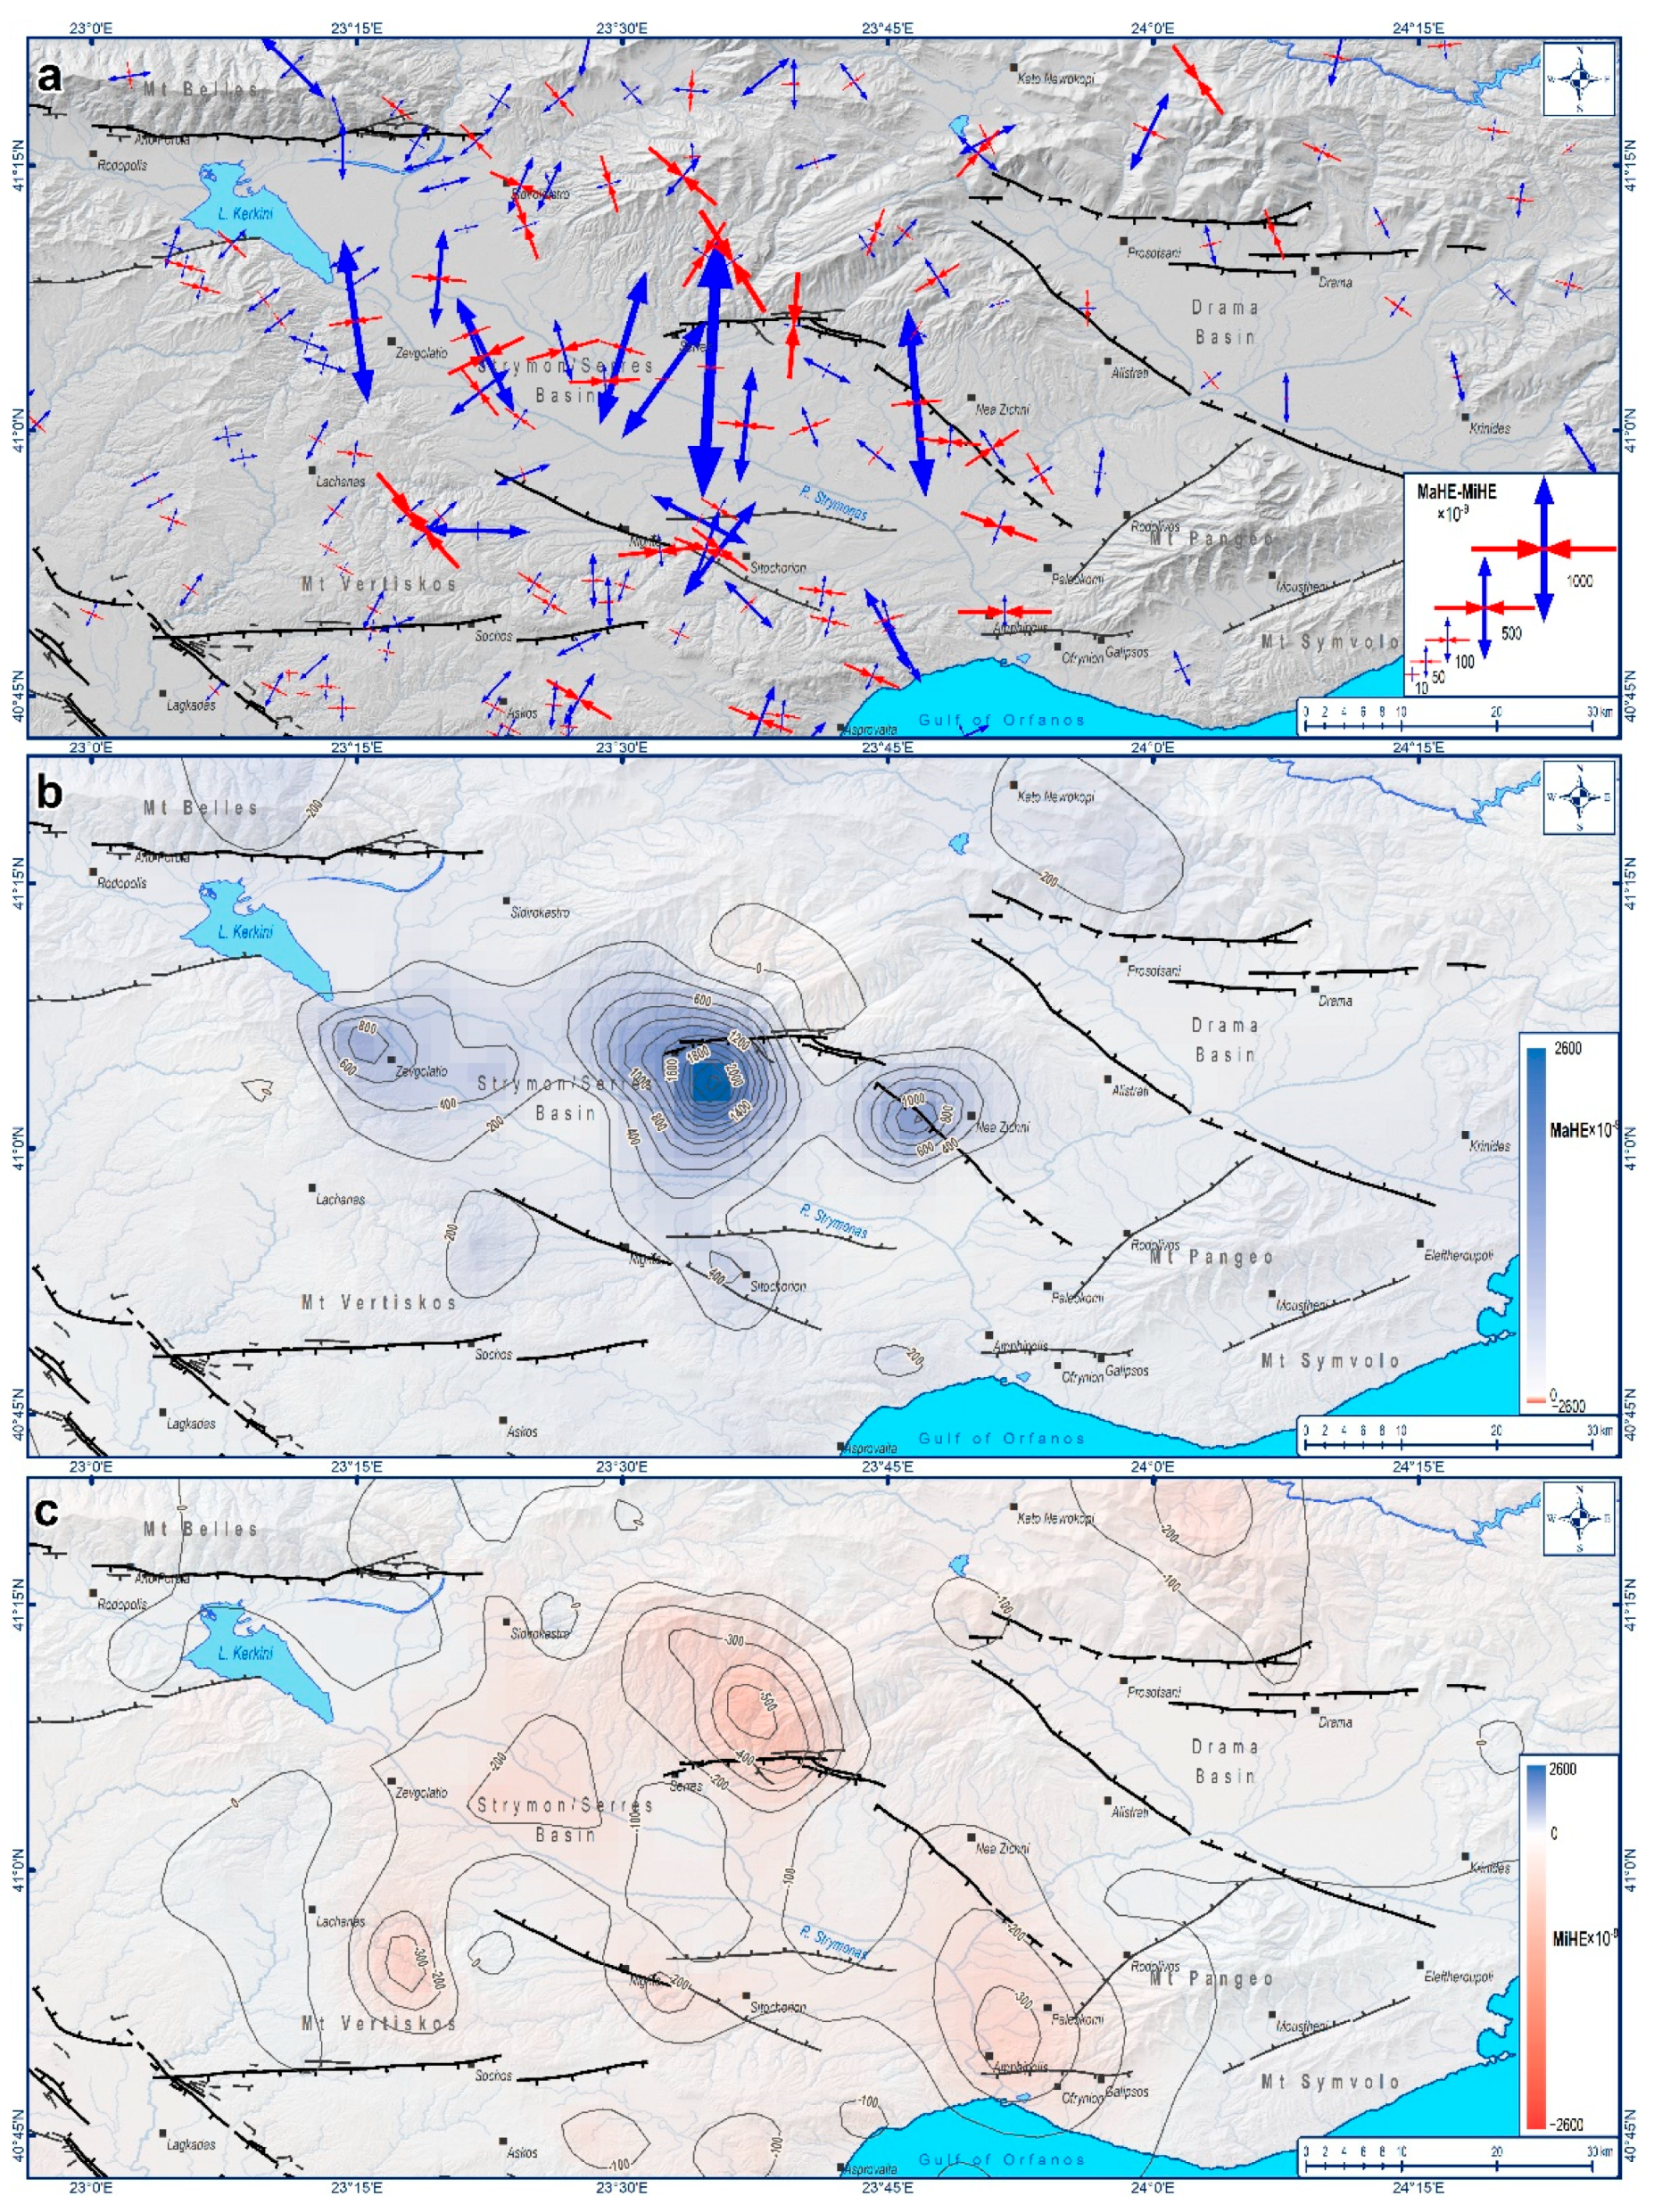 Applied Sciences | Free Full-Text | Geodetic Upper Crust Deformation Based  on Primary GNSS and INSAR Data in the Strymon Basin, Northern  Greece&mdash;Correlation with Active Faults